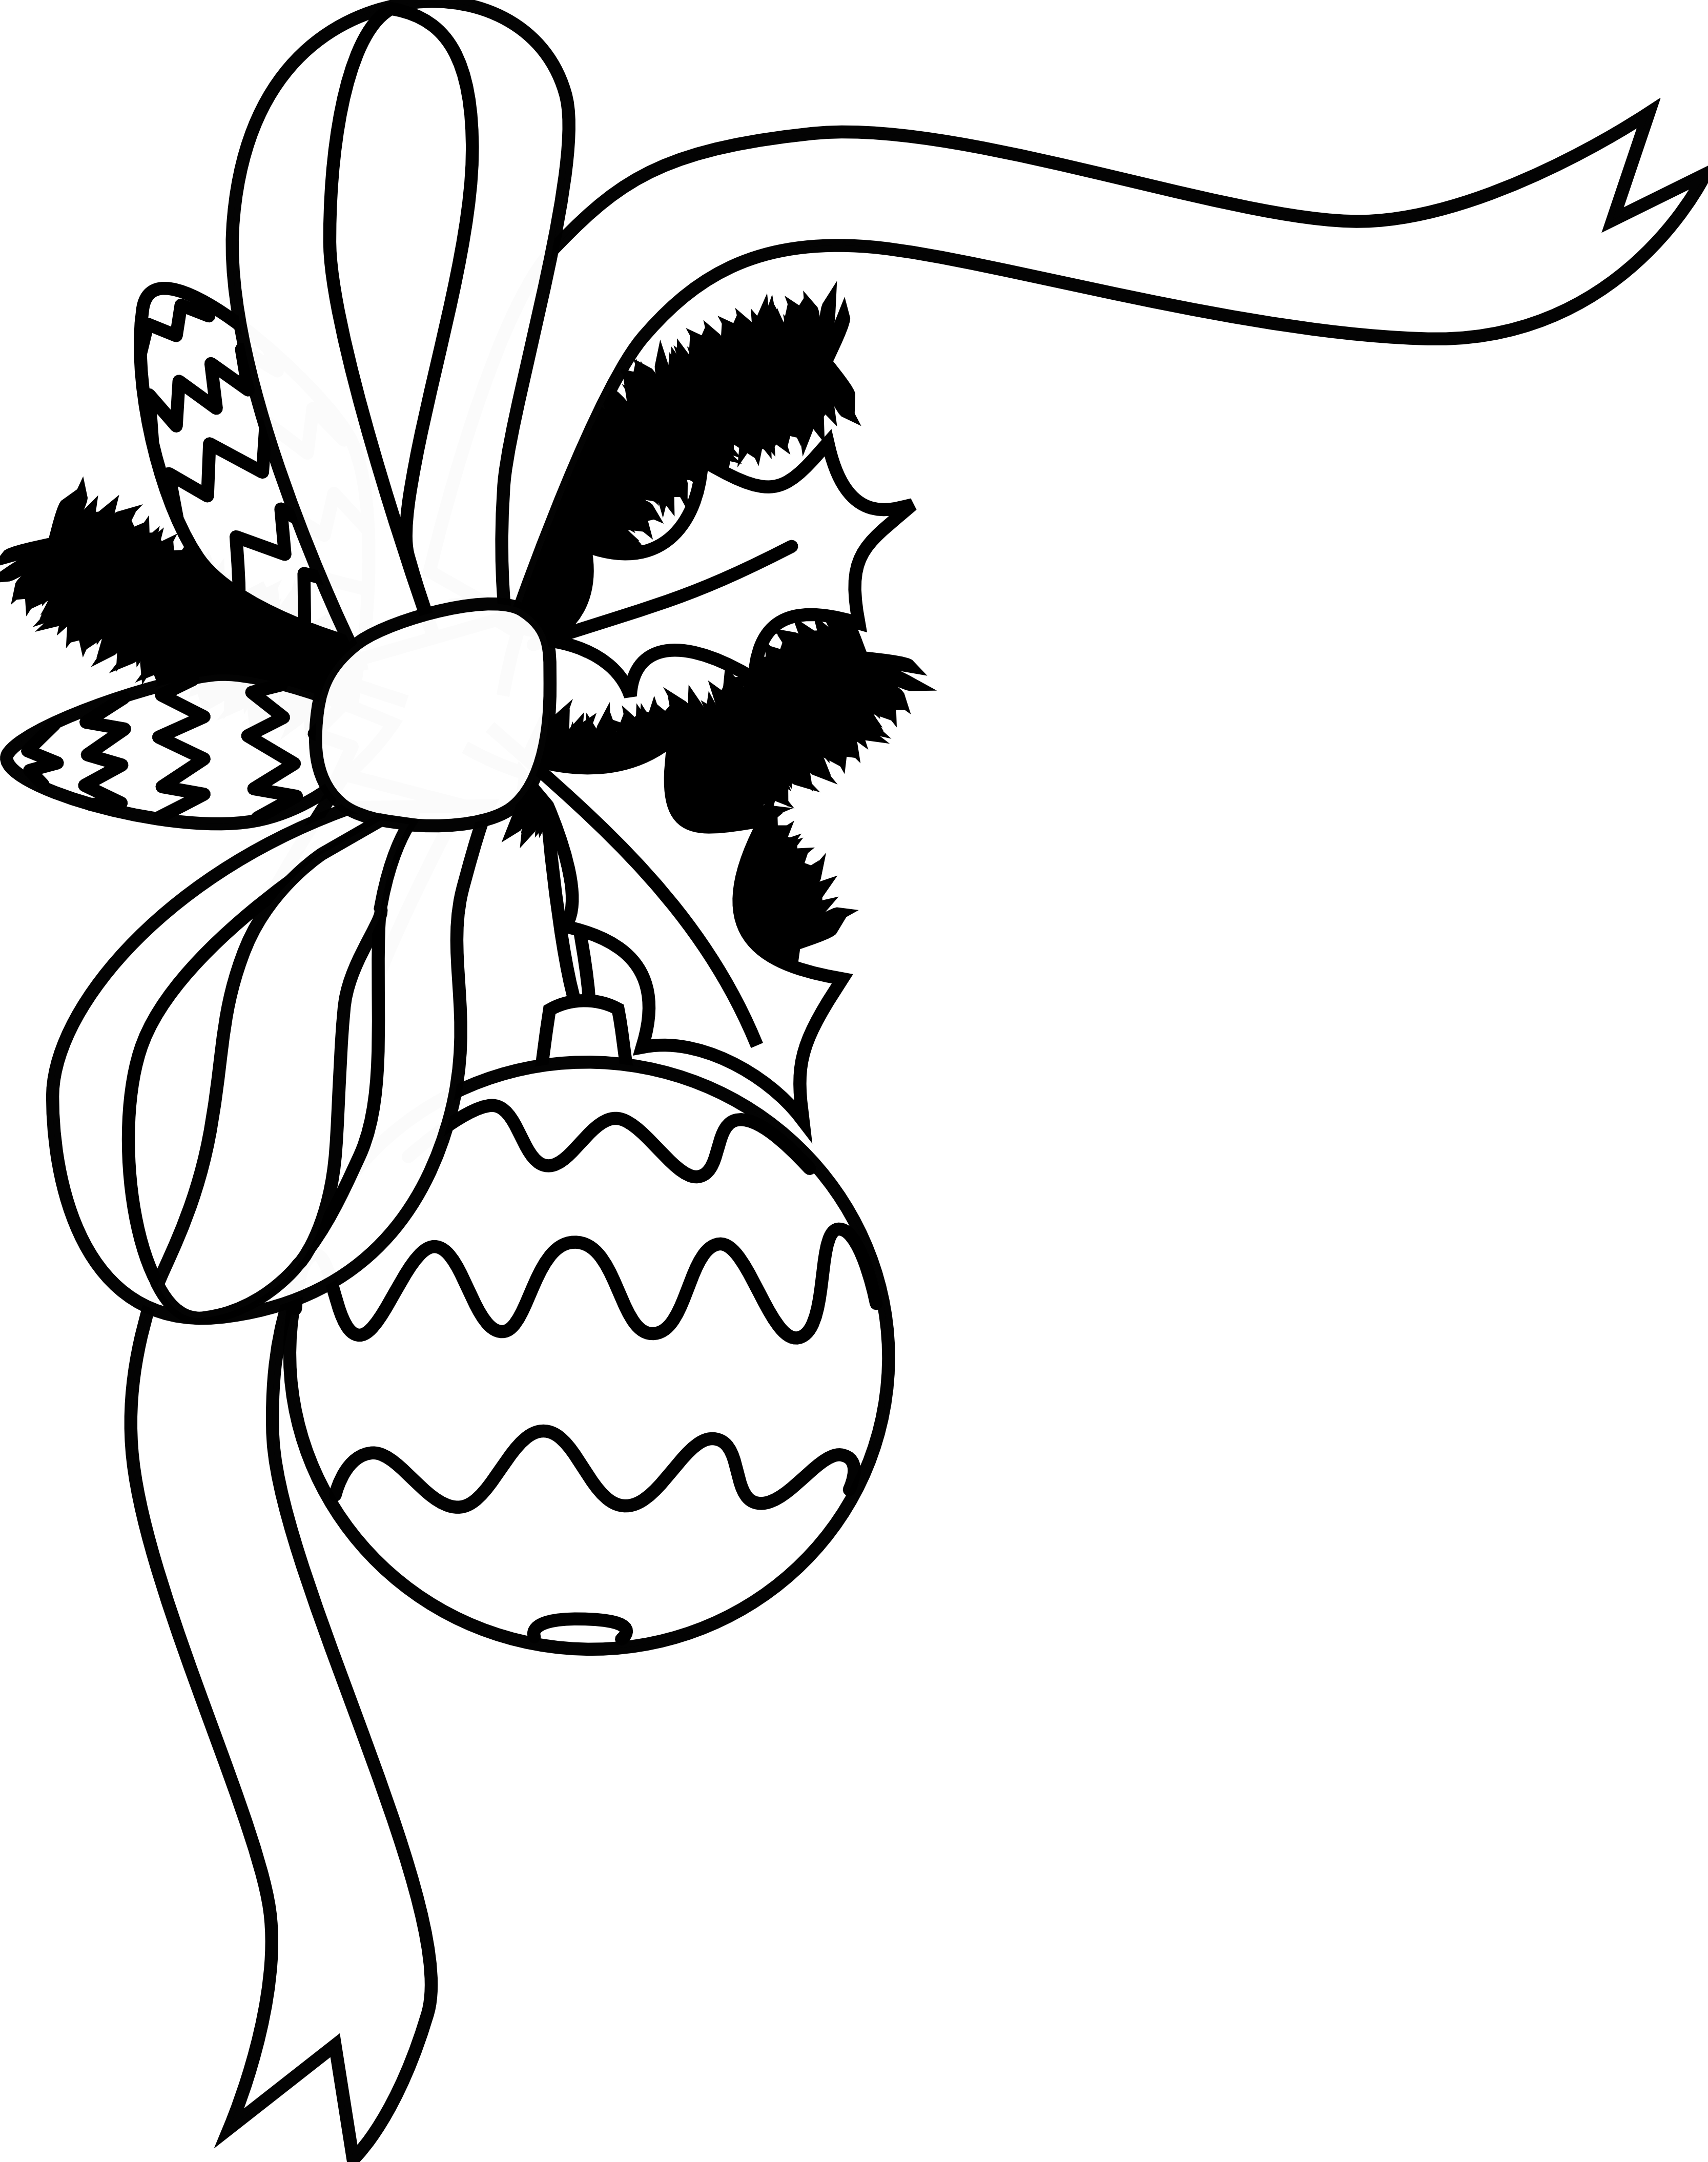 christmas border clipart blac - Christmas Clipart Black And White